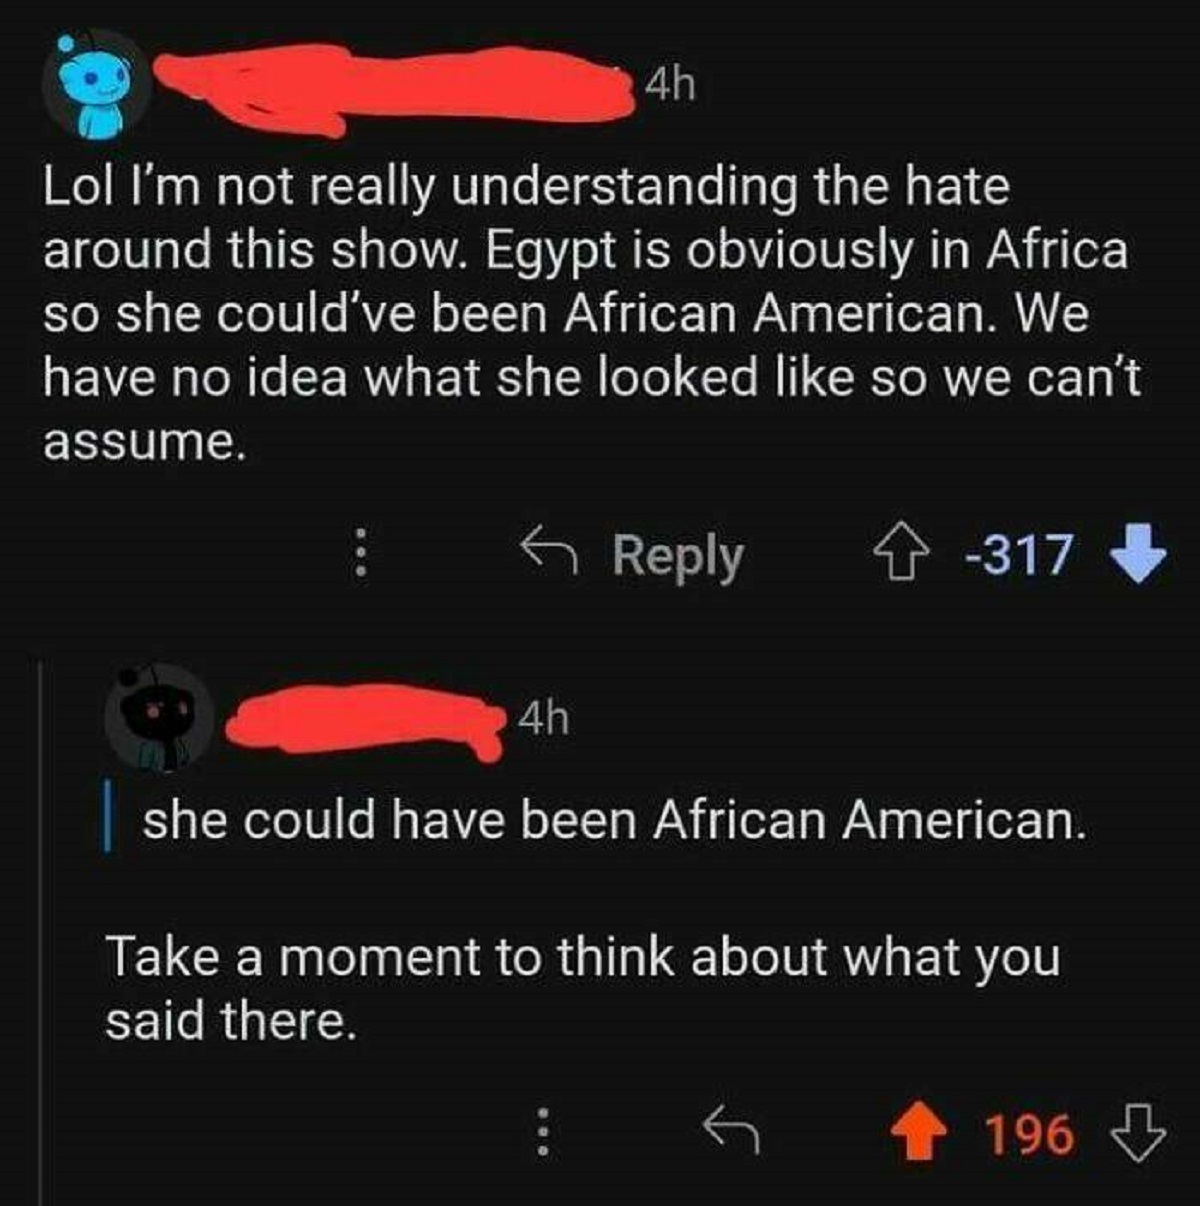 screenshot - 4h Lol I'm not really understanding the hate around this show. Egypt is obviously in Africa so she could've been African American. We have no idea what she looked so we can't assume. 317 4h she could have been African American. Take a moment 